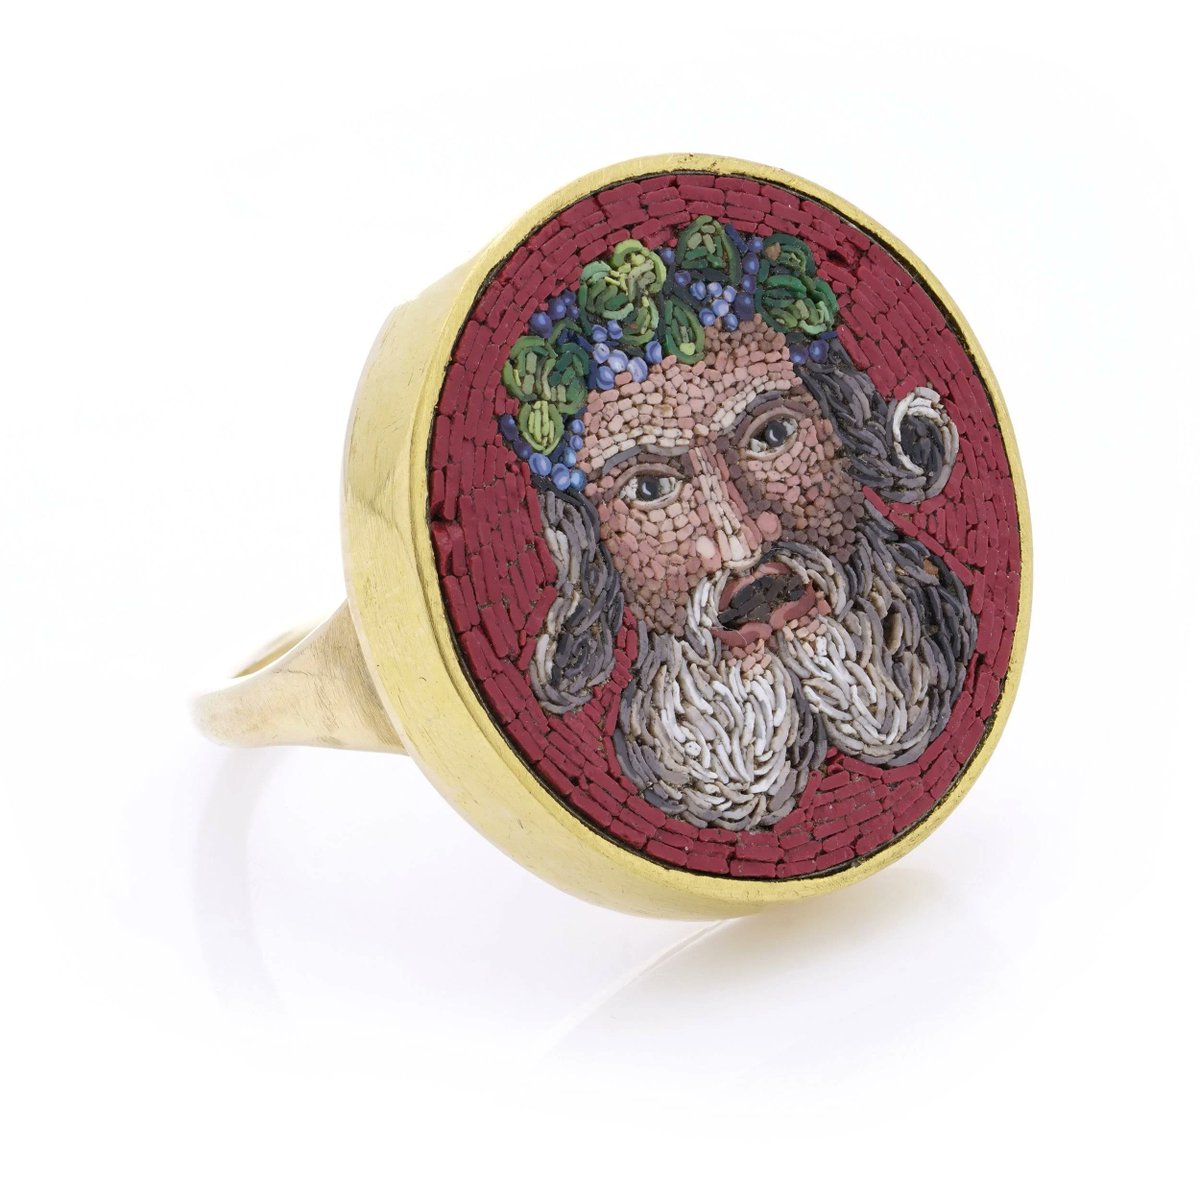 putting this 19c. italian micromosaic ring depicting bacchus as the only item on my christmas wish list.